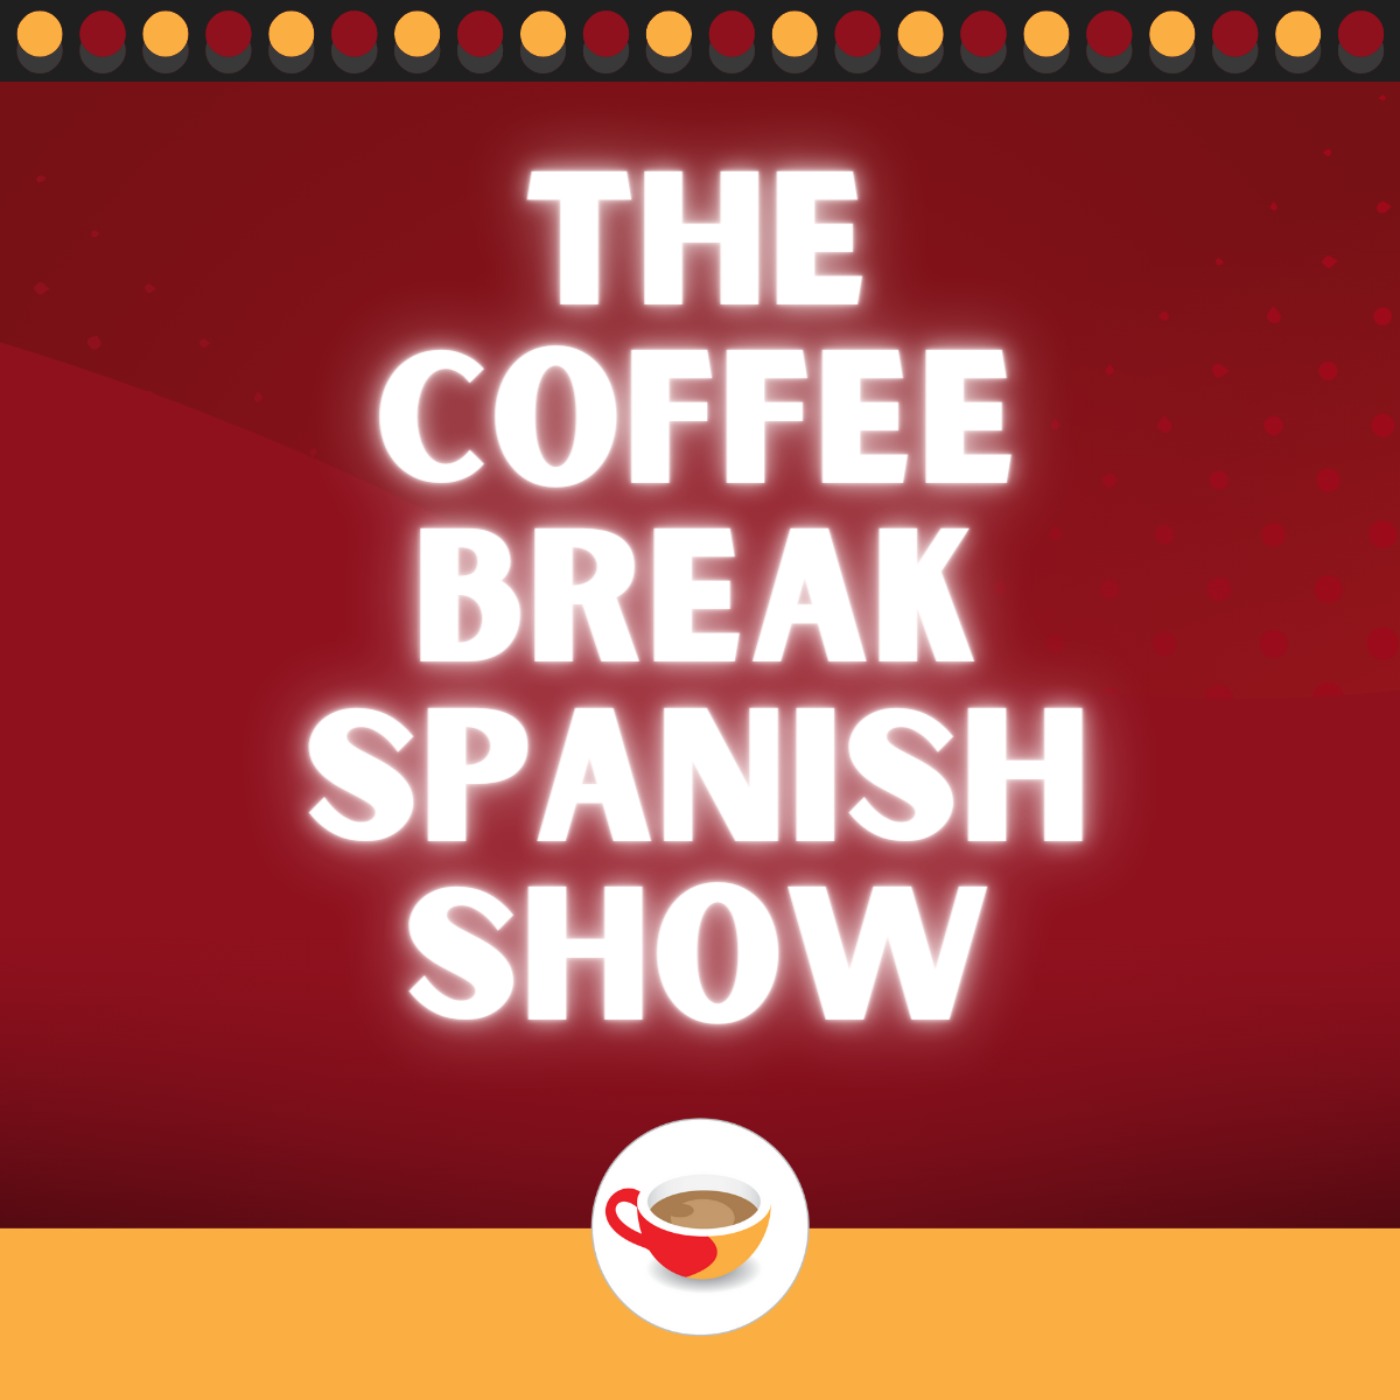 Words that change meaning with ‘ser’ and ‘estar’ | The Coffee Break Spanish Show 1.08